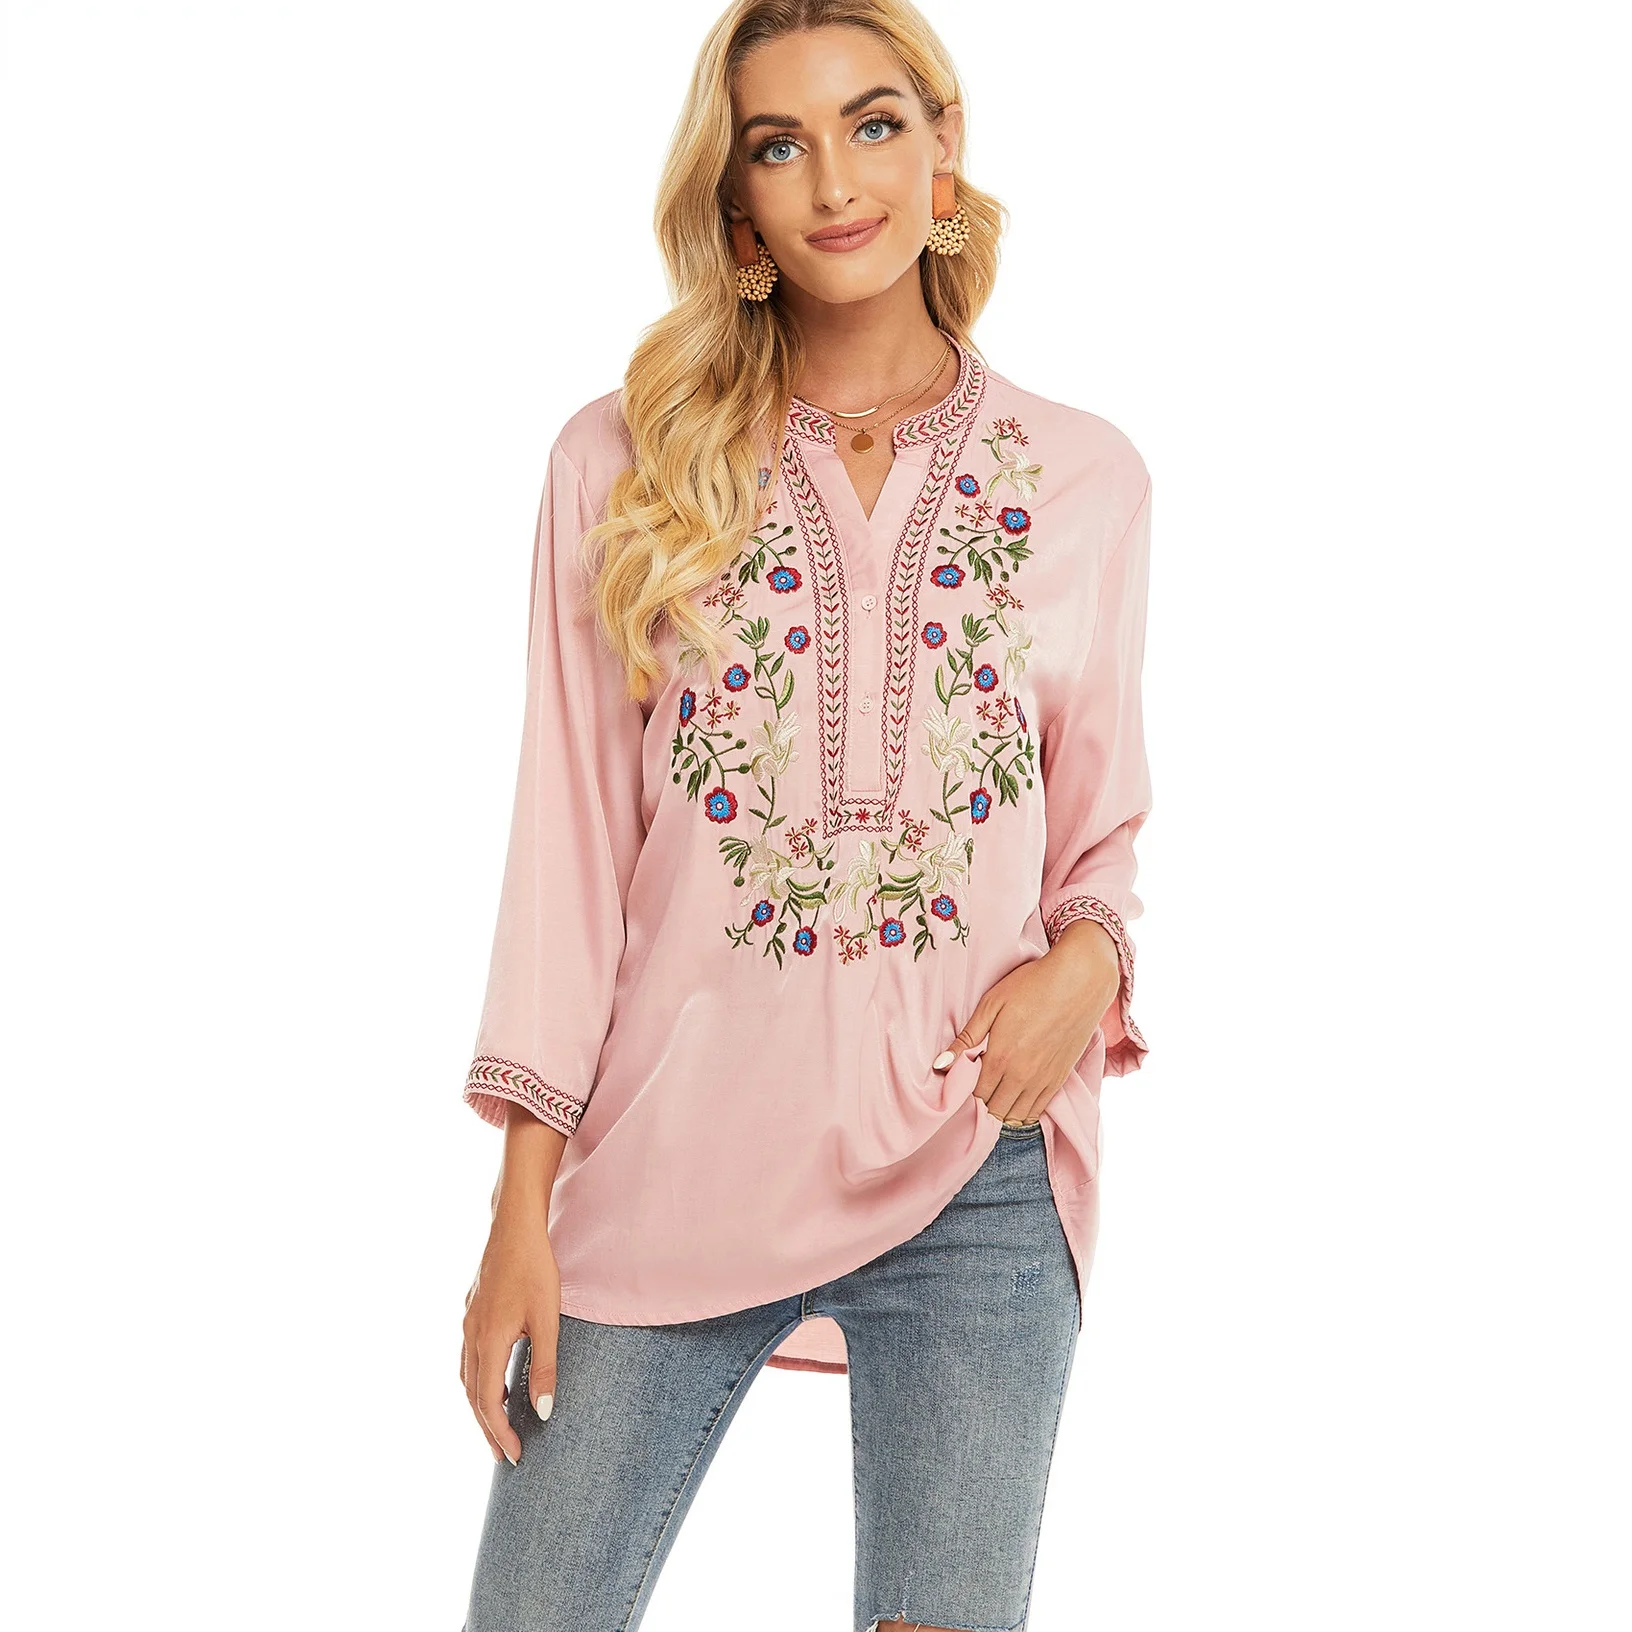 

Le Luz Pink Floral Embroidery Blouse Shirt 100% Cotton Summer Mexican Women Shirt 2xl 3Xl Ethnic Boho Chic Lady Shirt Tops